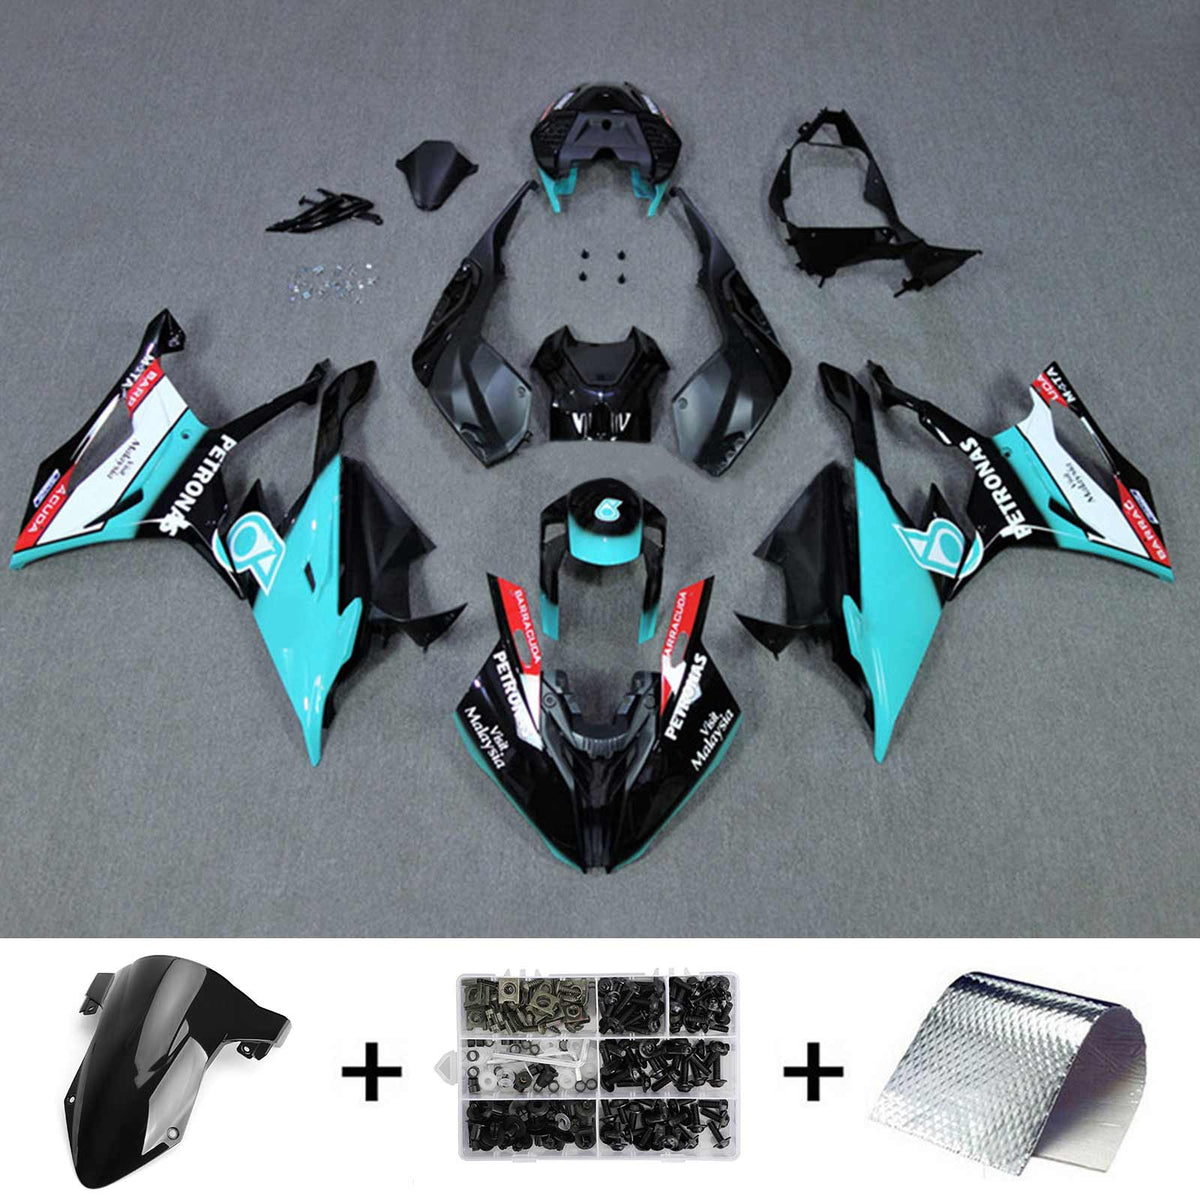 Amotopart 2019-2022 Kit carena BMW S1000RR/M1000RR Nero Ciano Racing Style2